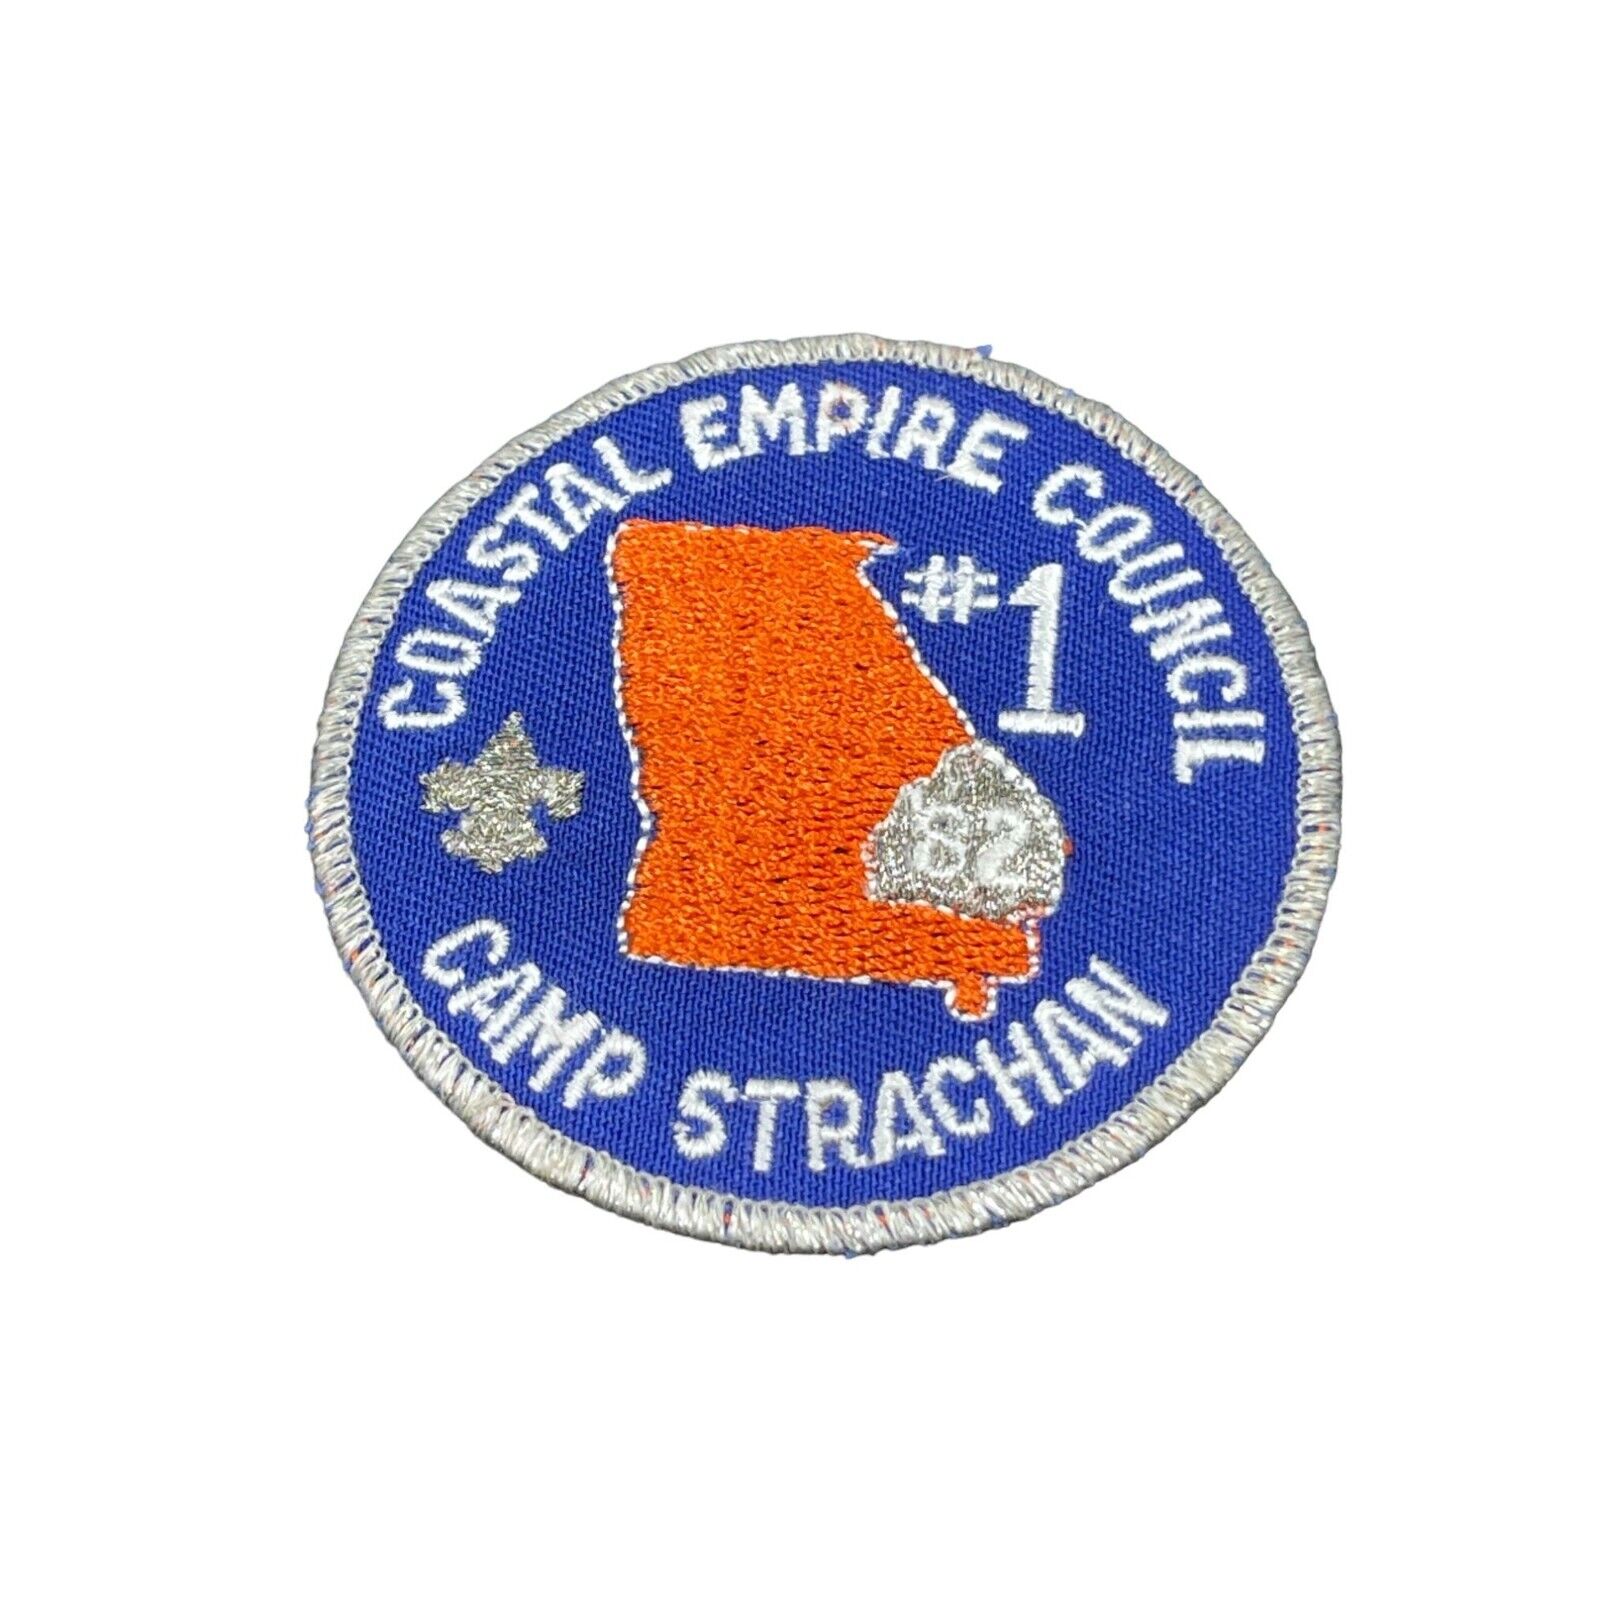 1982 Boy Scouts of America Coastal Empire Council Camp Strachan Patch